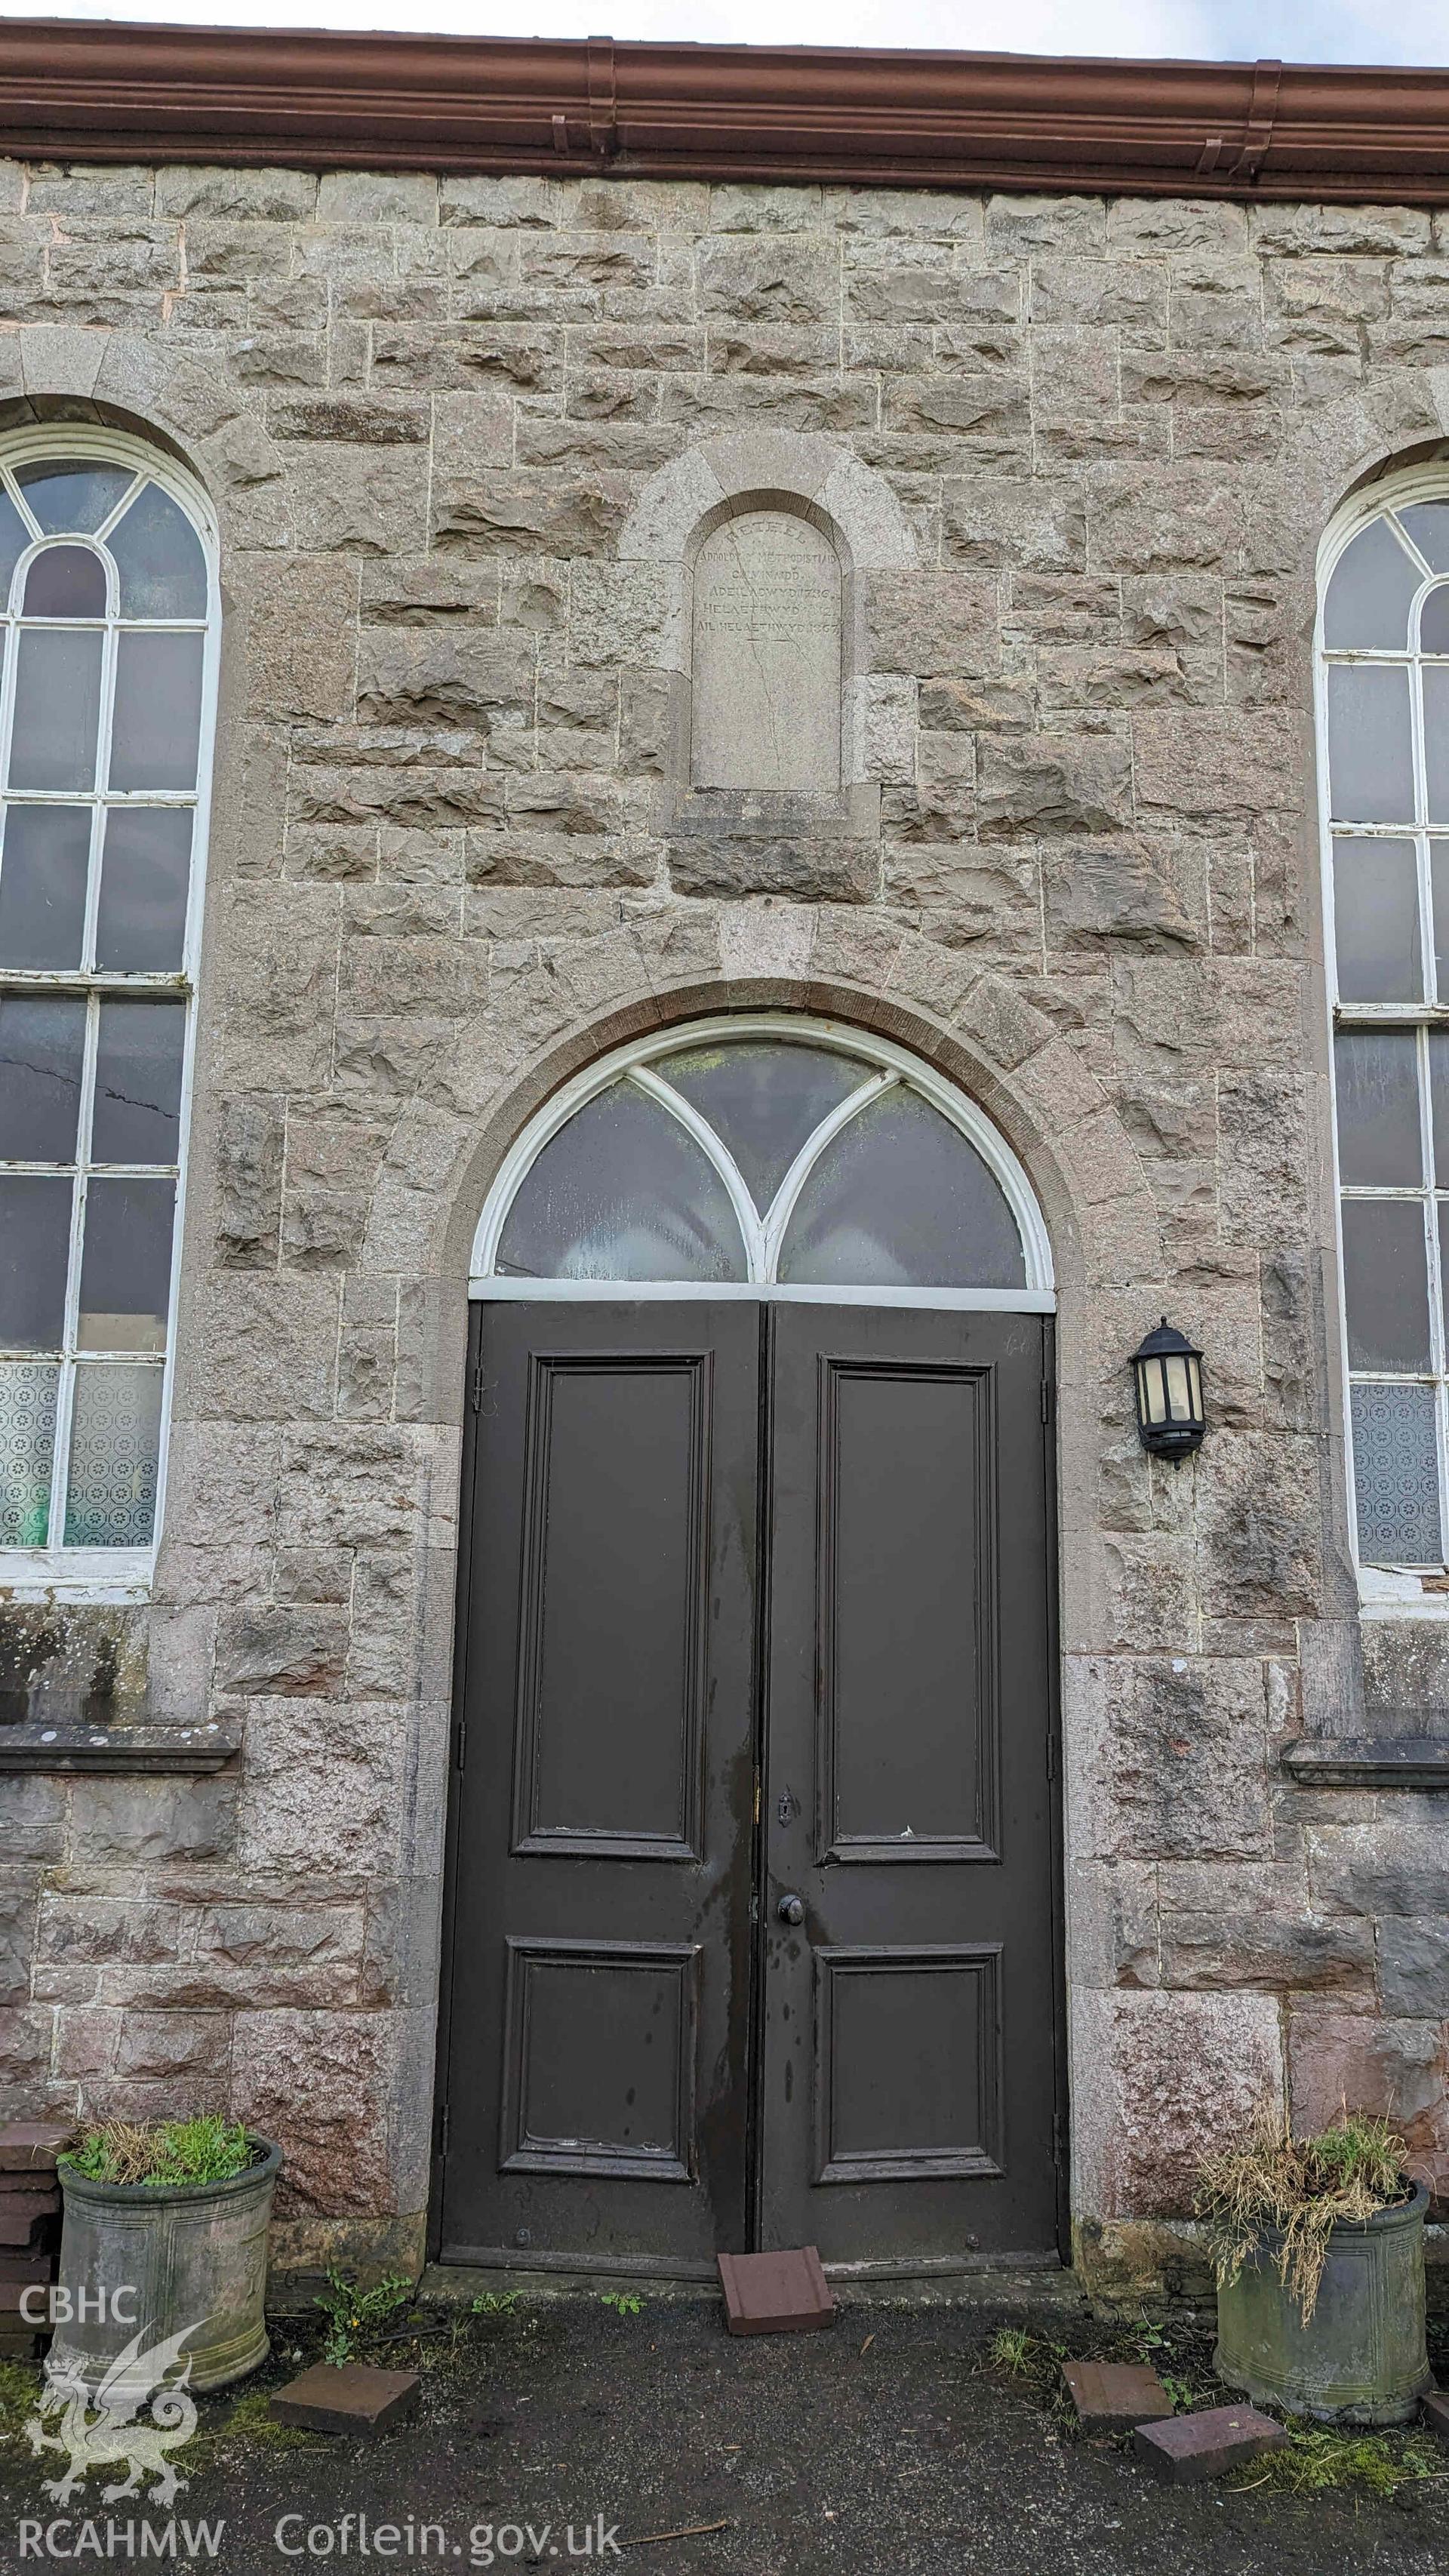 Photograph showing date stone above entrance, from a level 3 Historic Building Recording for Rhiw Chapel, carried out by Dee Archaeological Services as a condition of Listed Building Consent in March 2024.